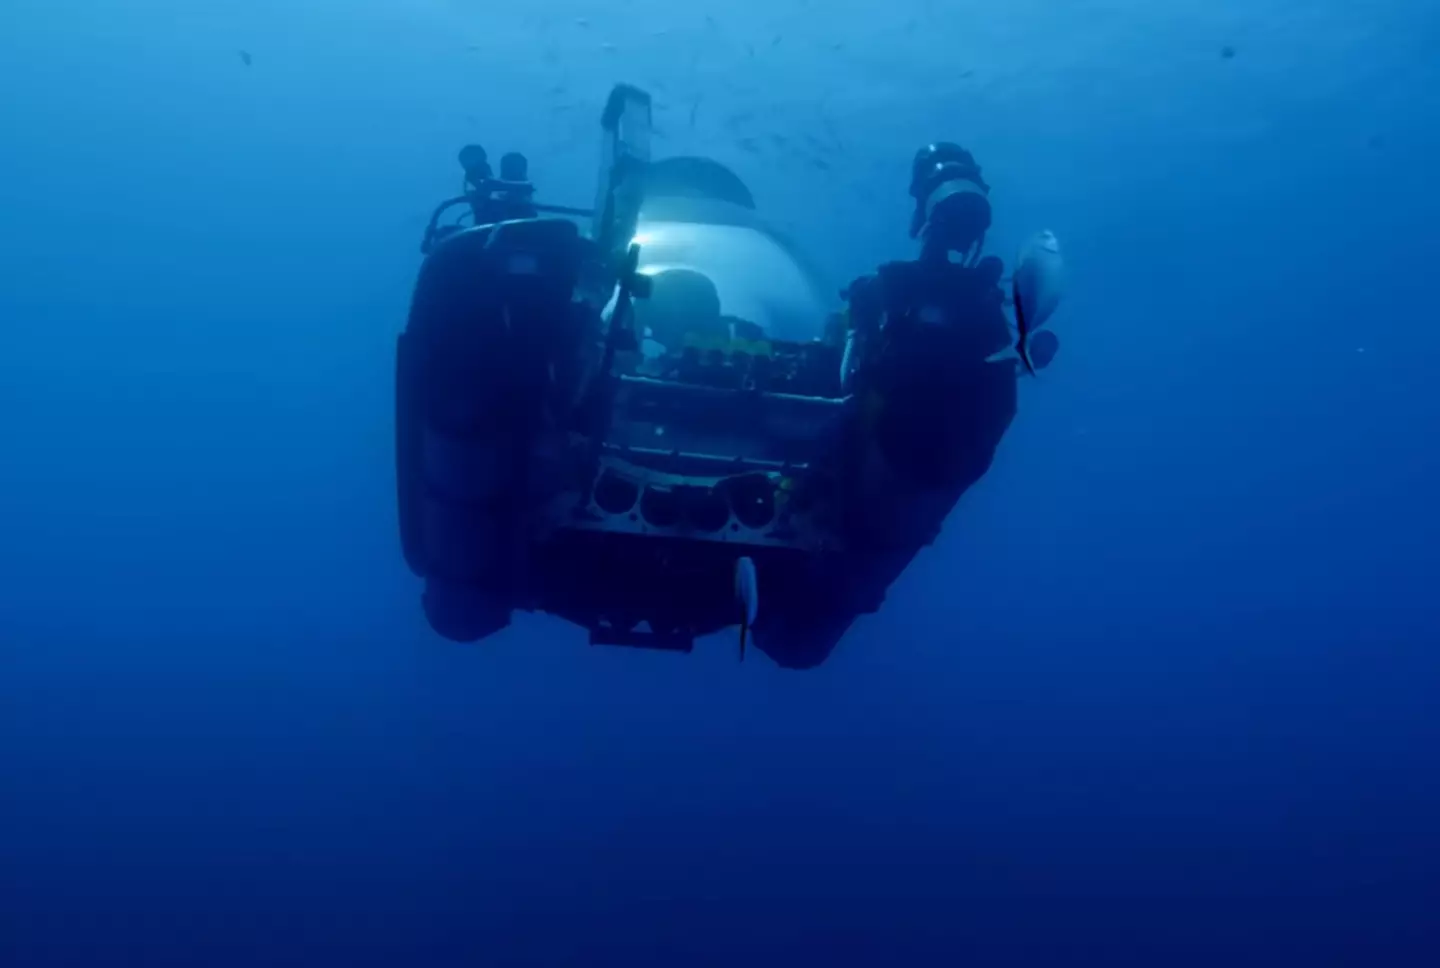 OceanX researchers went down in one of its submarines in 2019. (YouTube/OceanX)